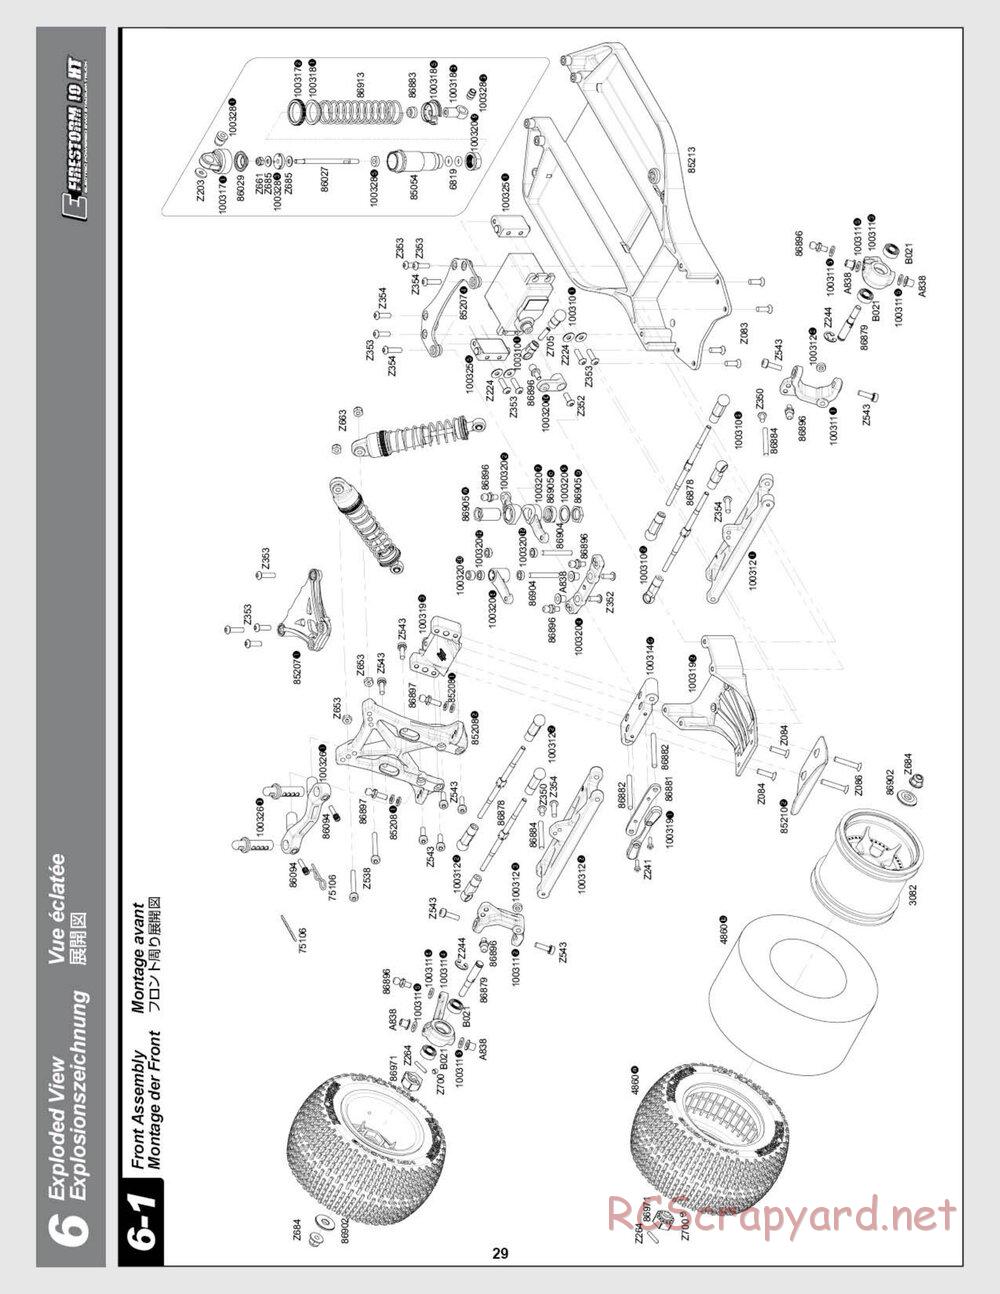 HPI - E-Firestorm 10 HT - Exploded View - Page 29